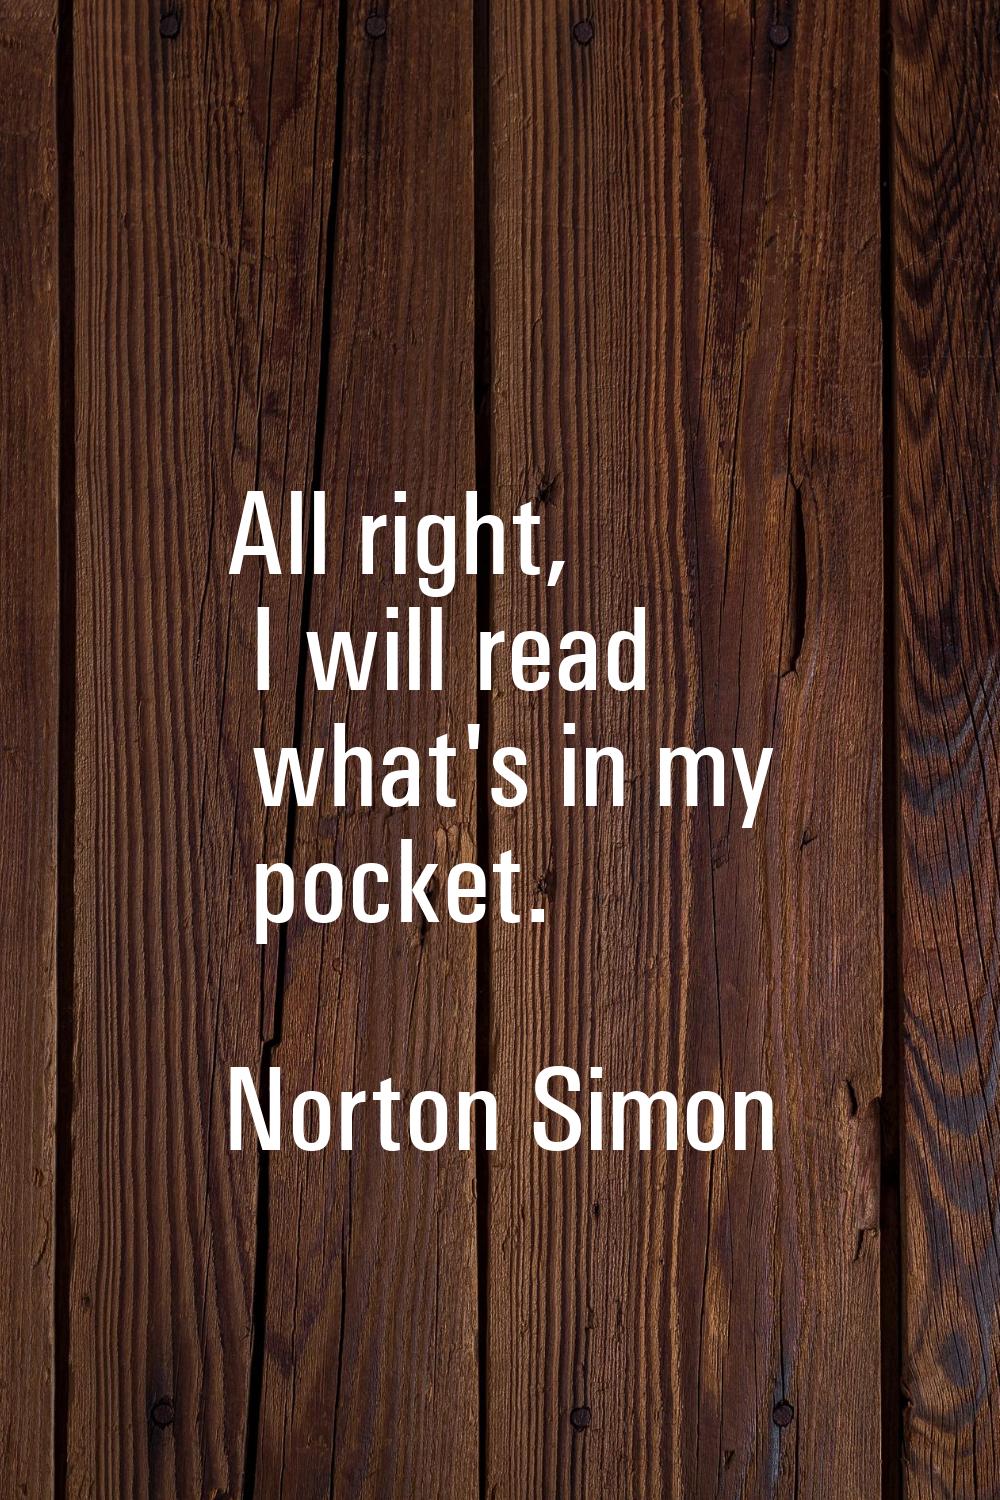 All right, I will read what's in my pocket.